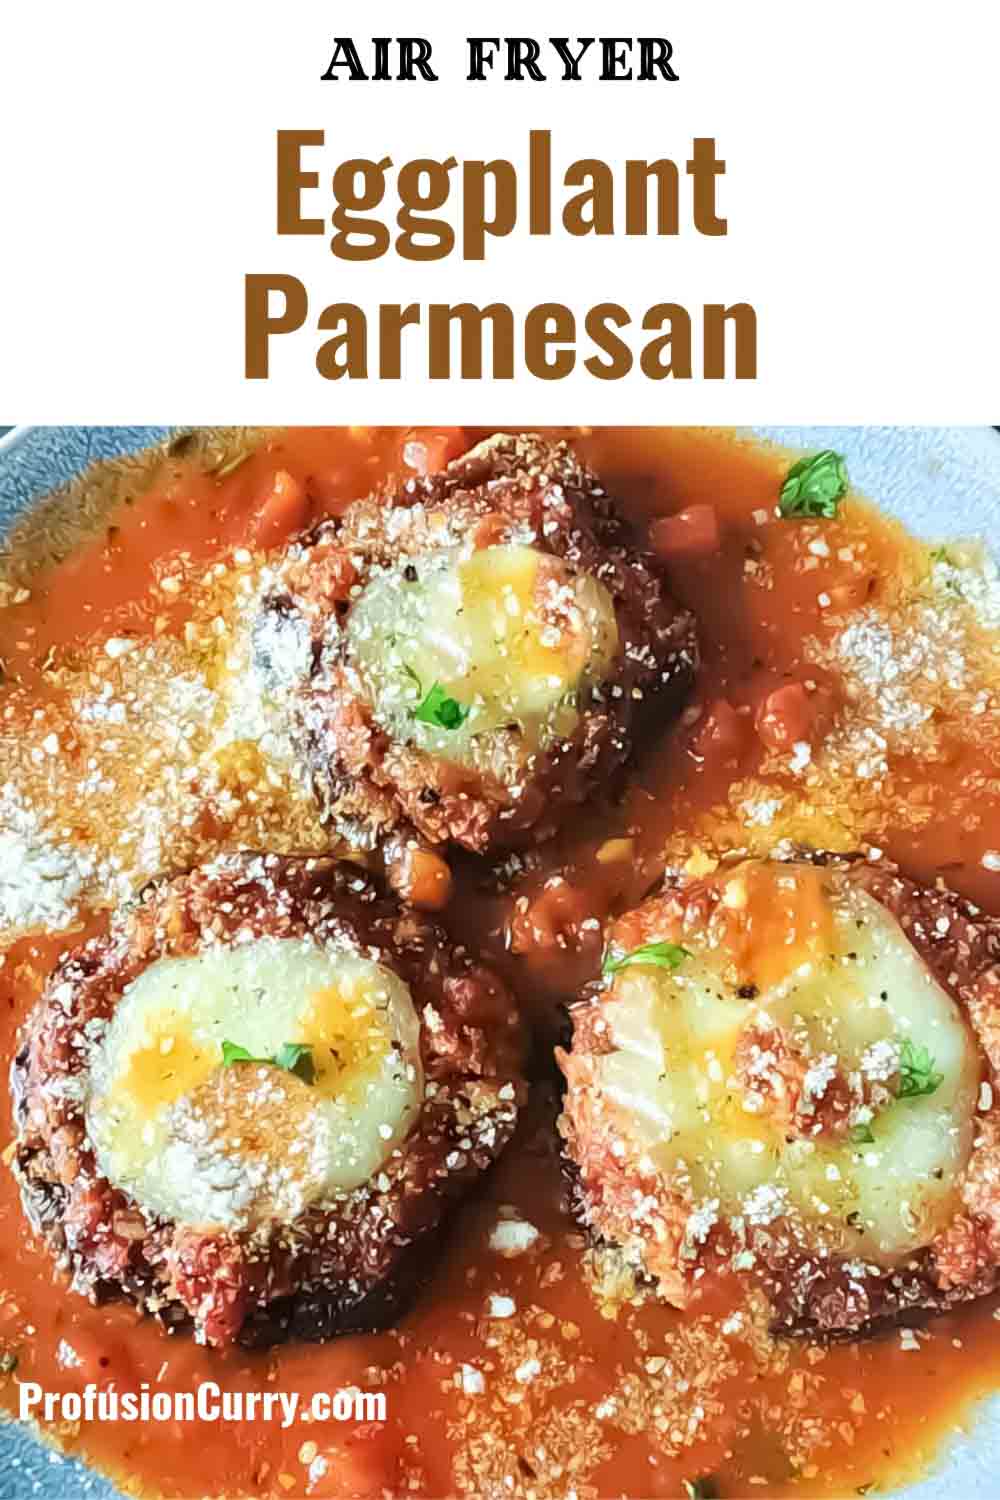 Air Fryer Eggplant Parmesan is crispy, cheesy and healthier version of the classic Eggplant recipe.